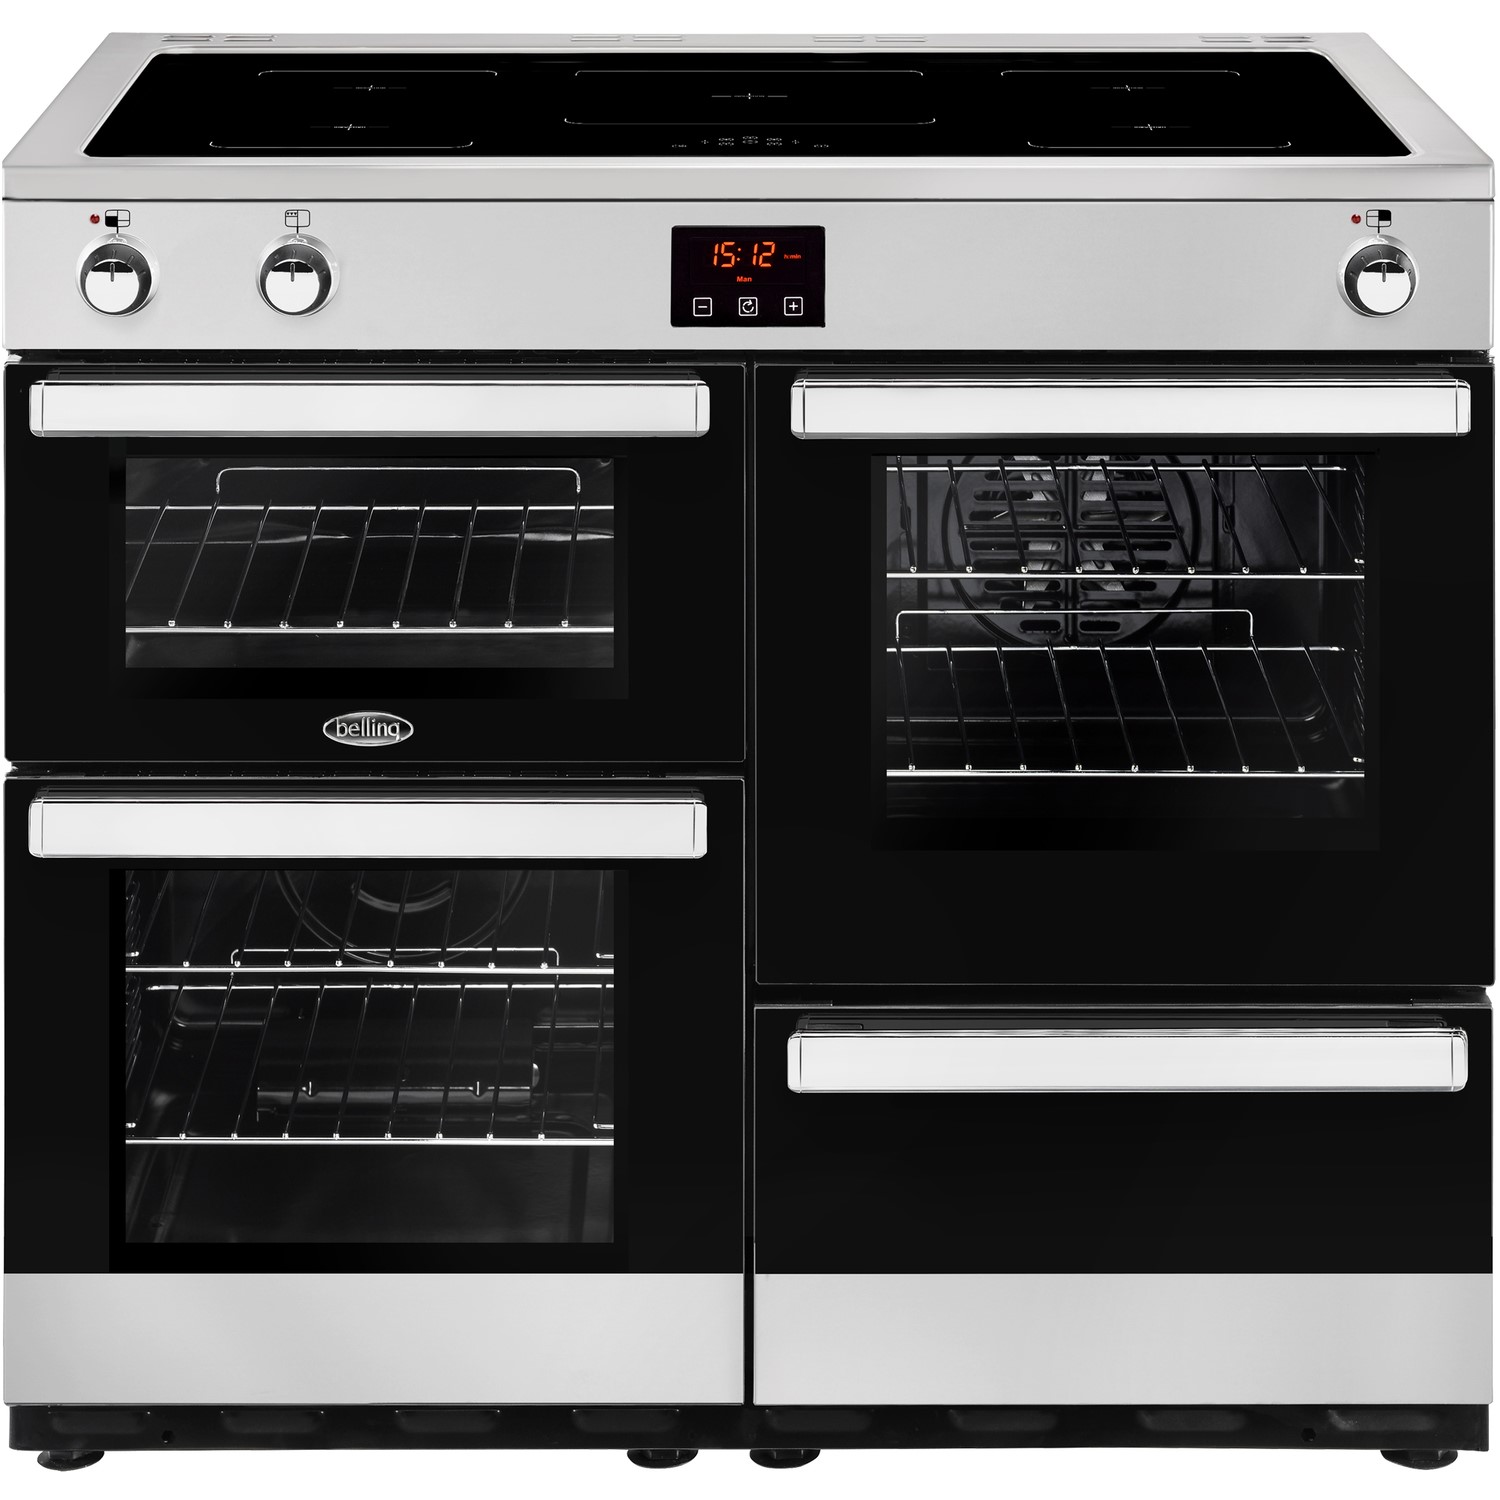 Belling Cookcentre 100Ei 100cm Electric Range Cooker with Induction Hob - Stainless Steel